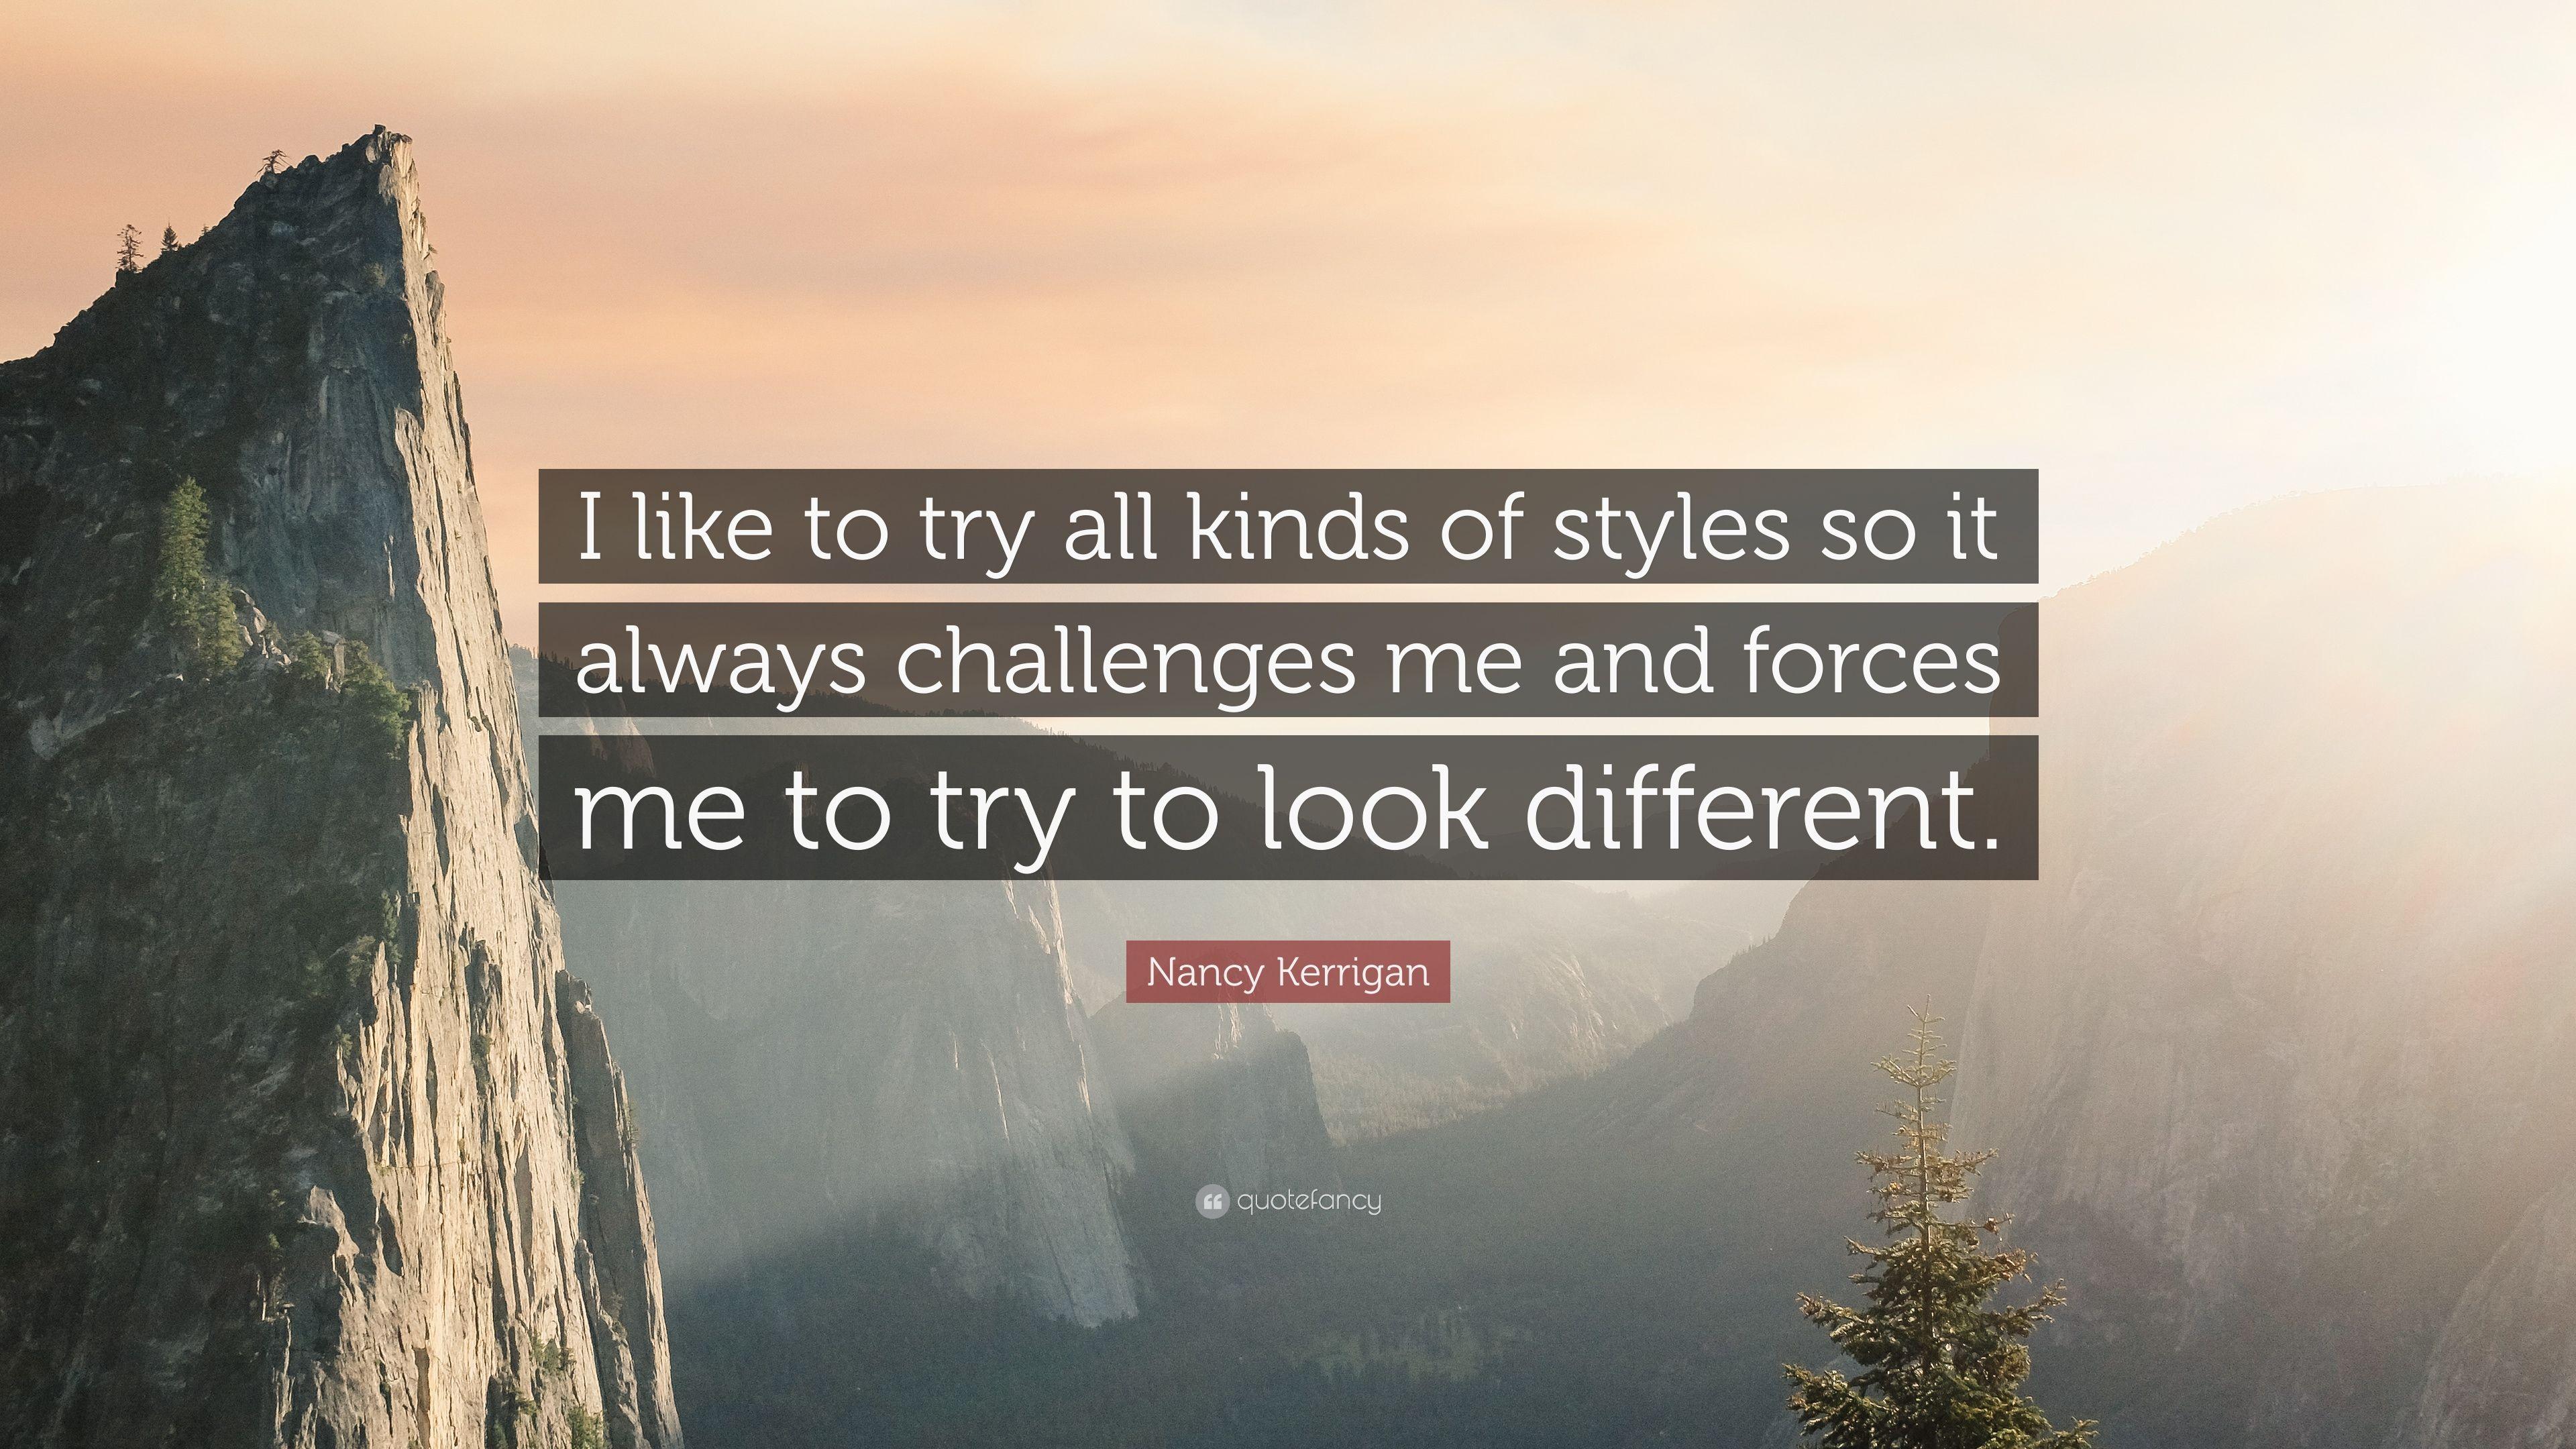 Nancy Kerrigan Quote: “I like to try all kinds of styles so it